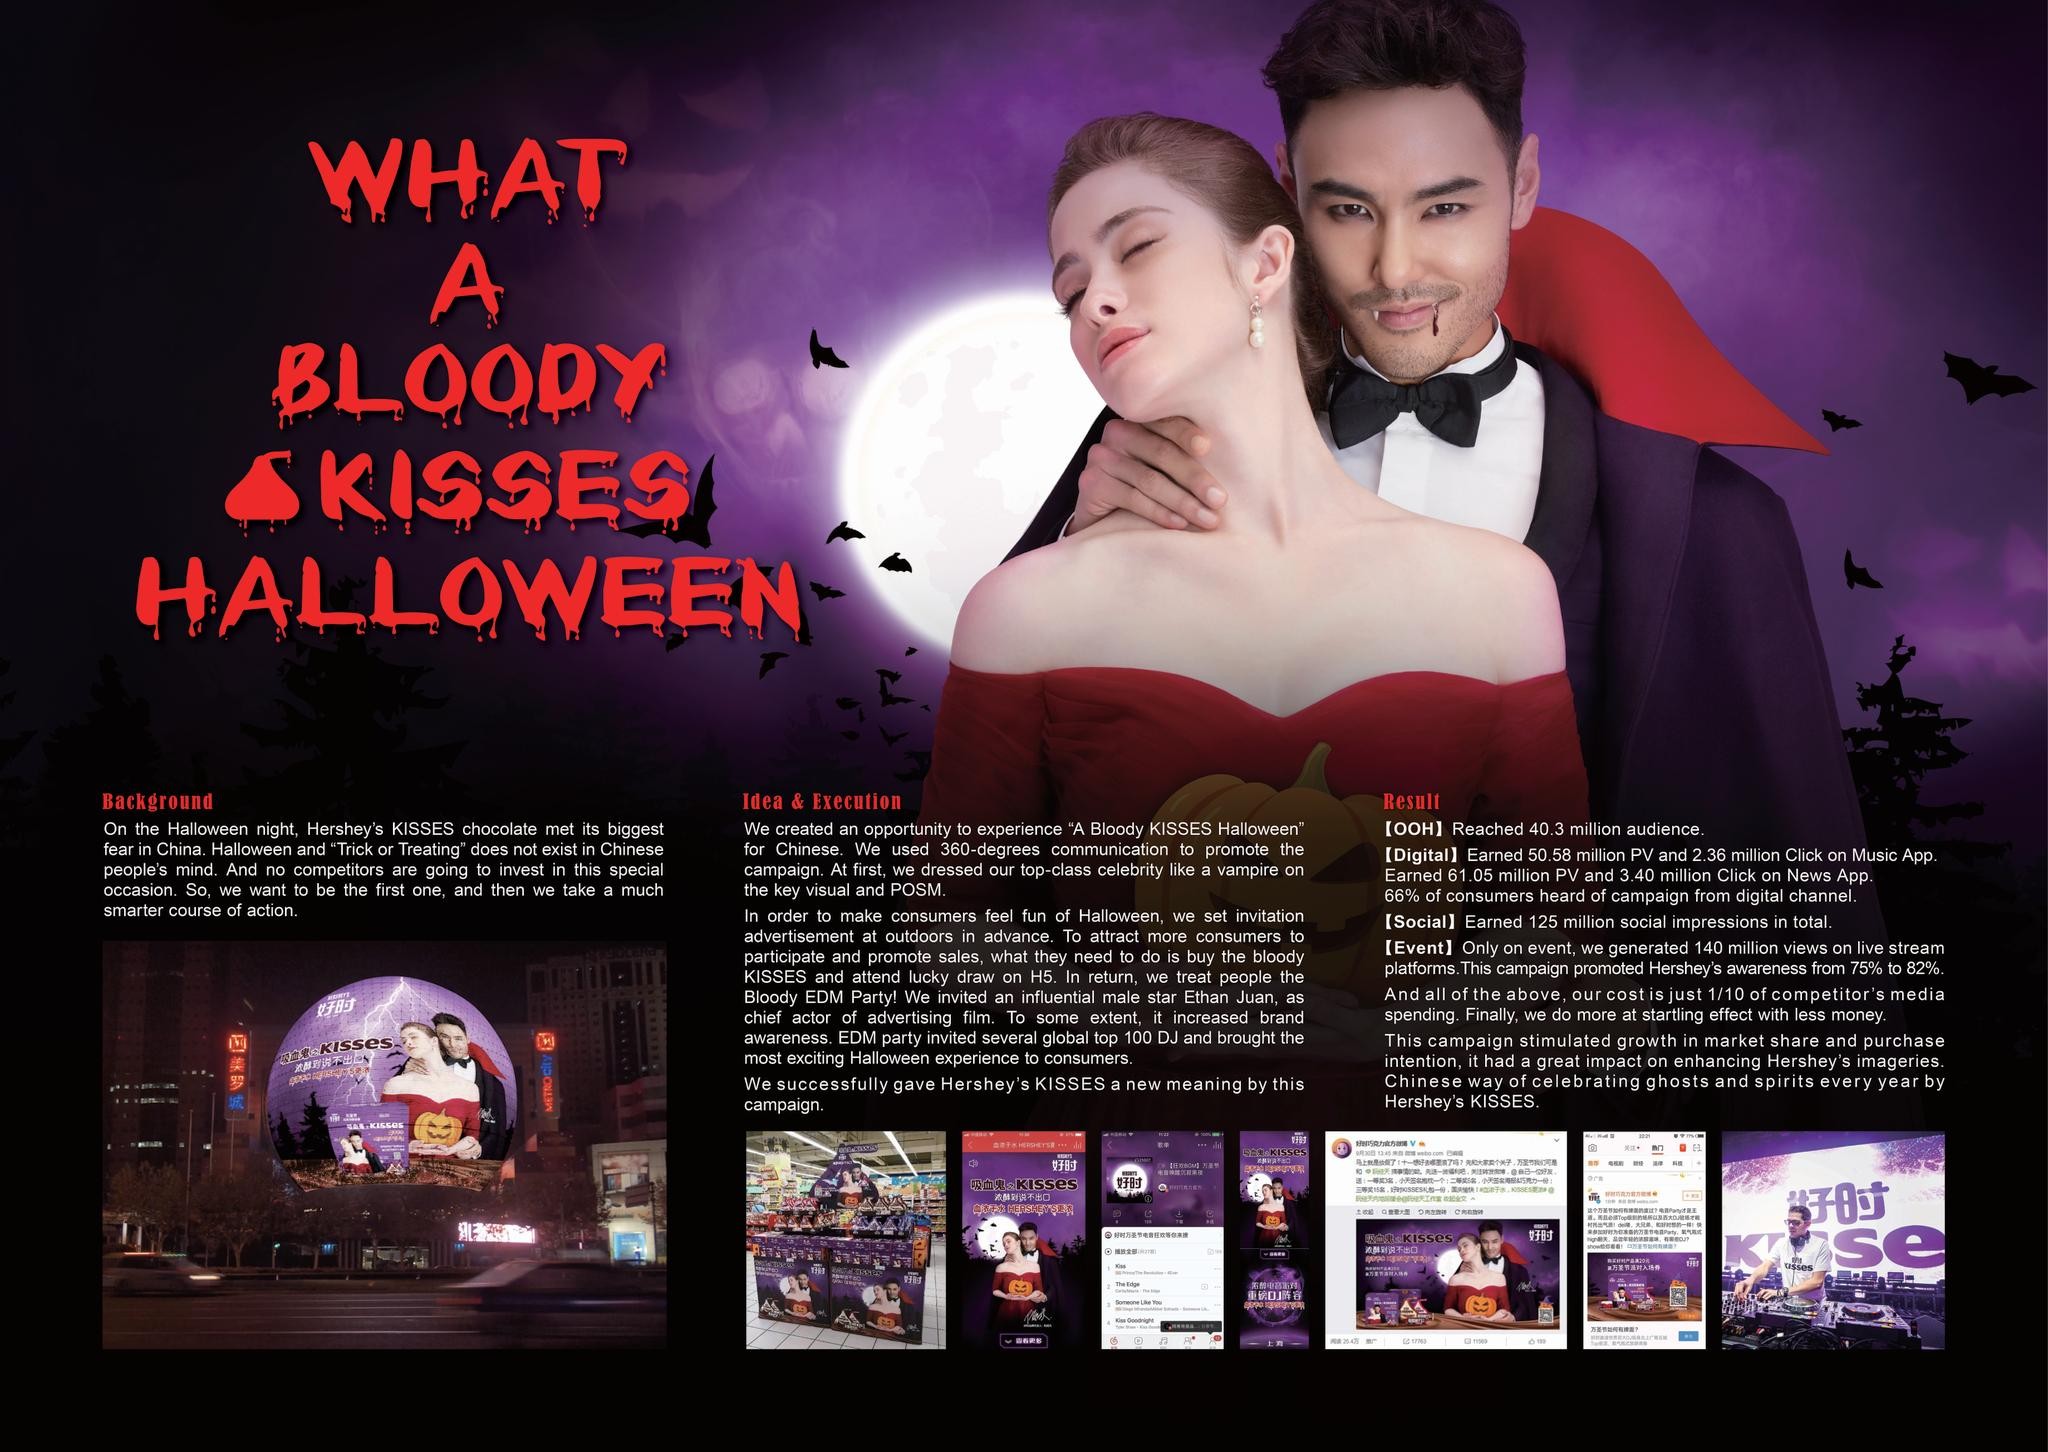 What a bloody KISSES halloween！